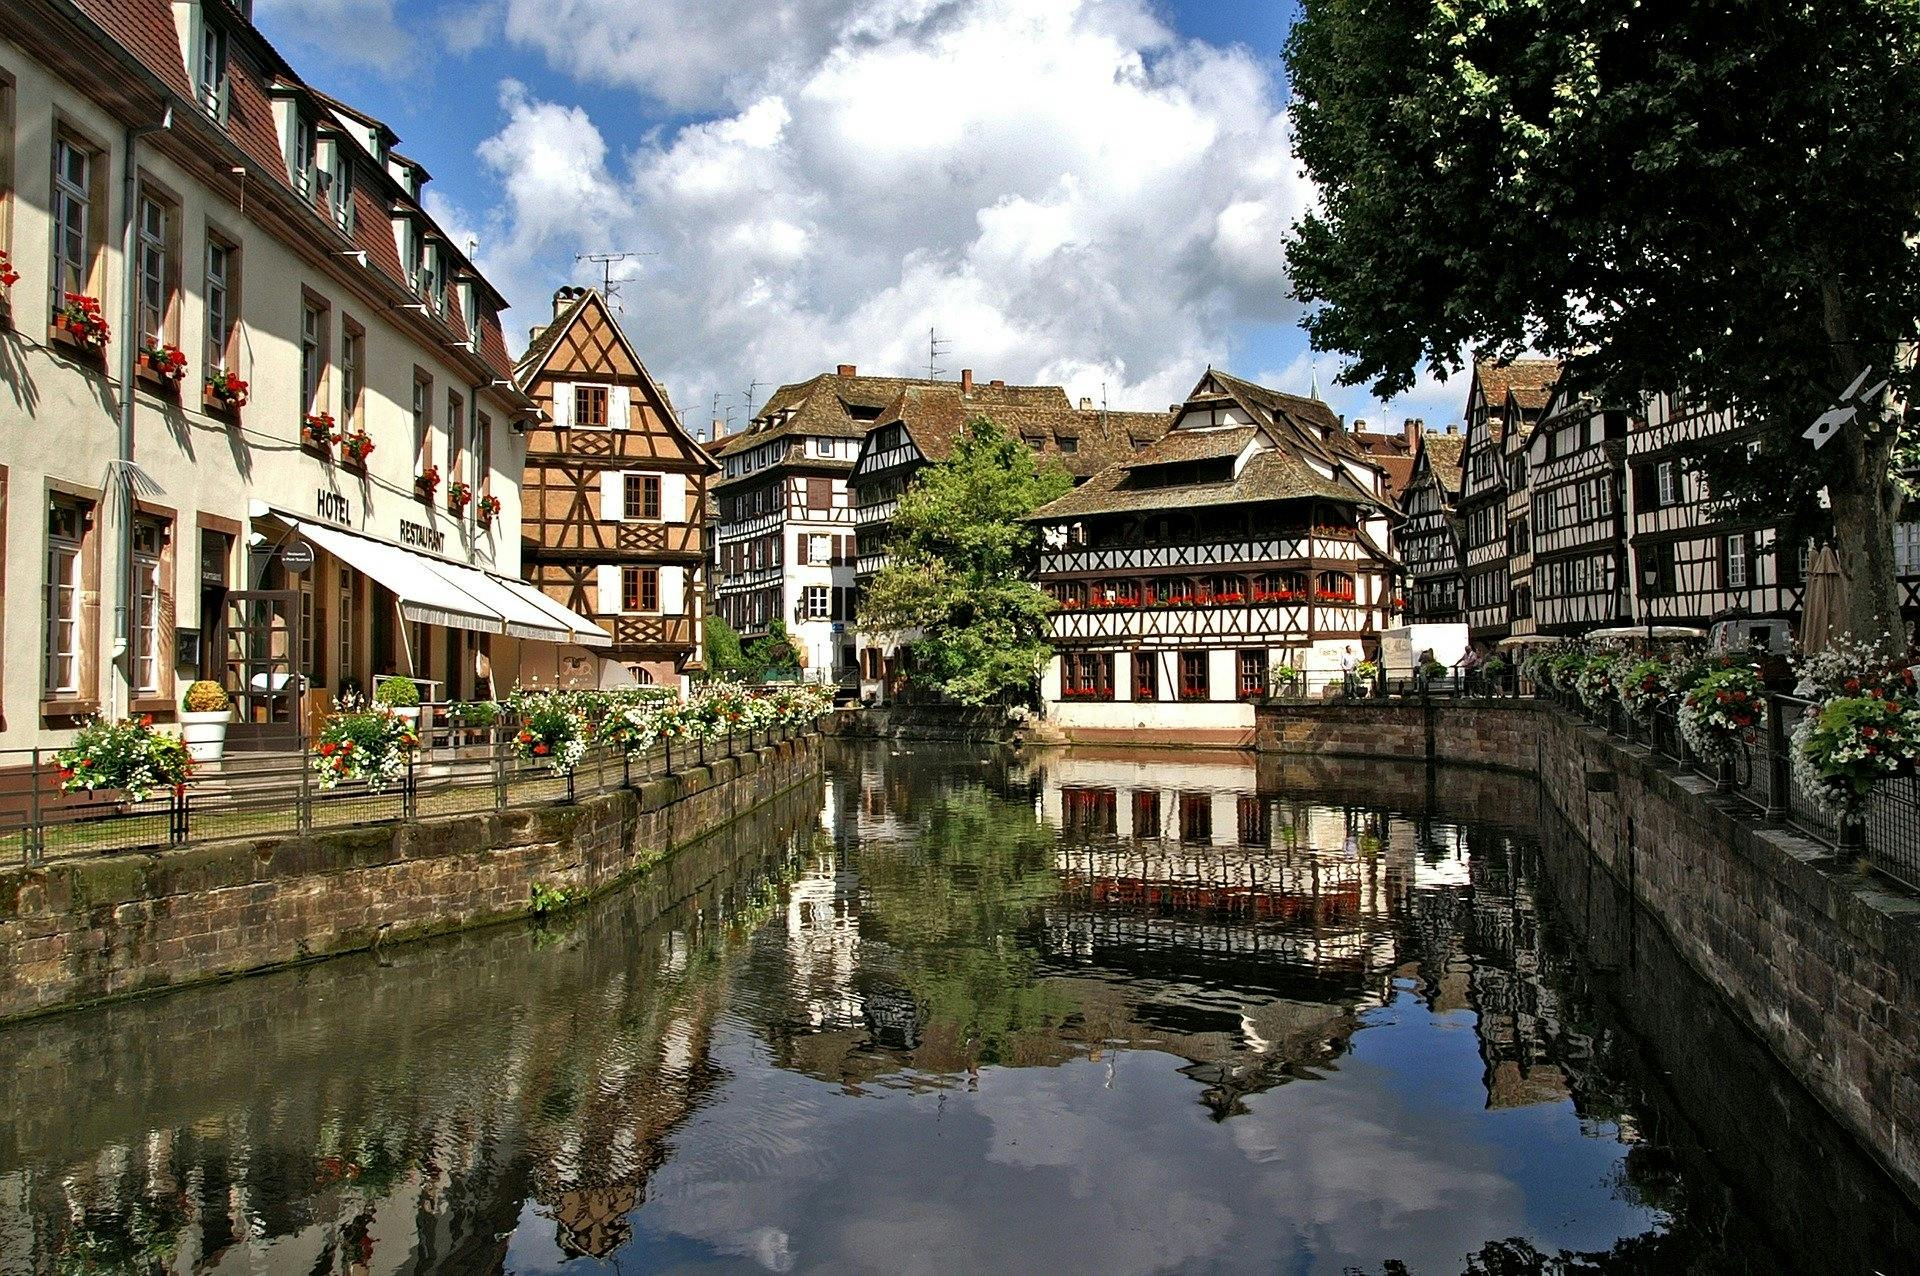 Discover Strasbourg's most Photogenic Spots with a Local